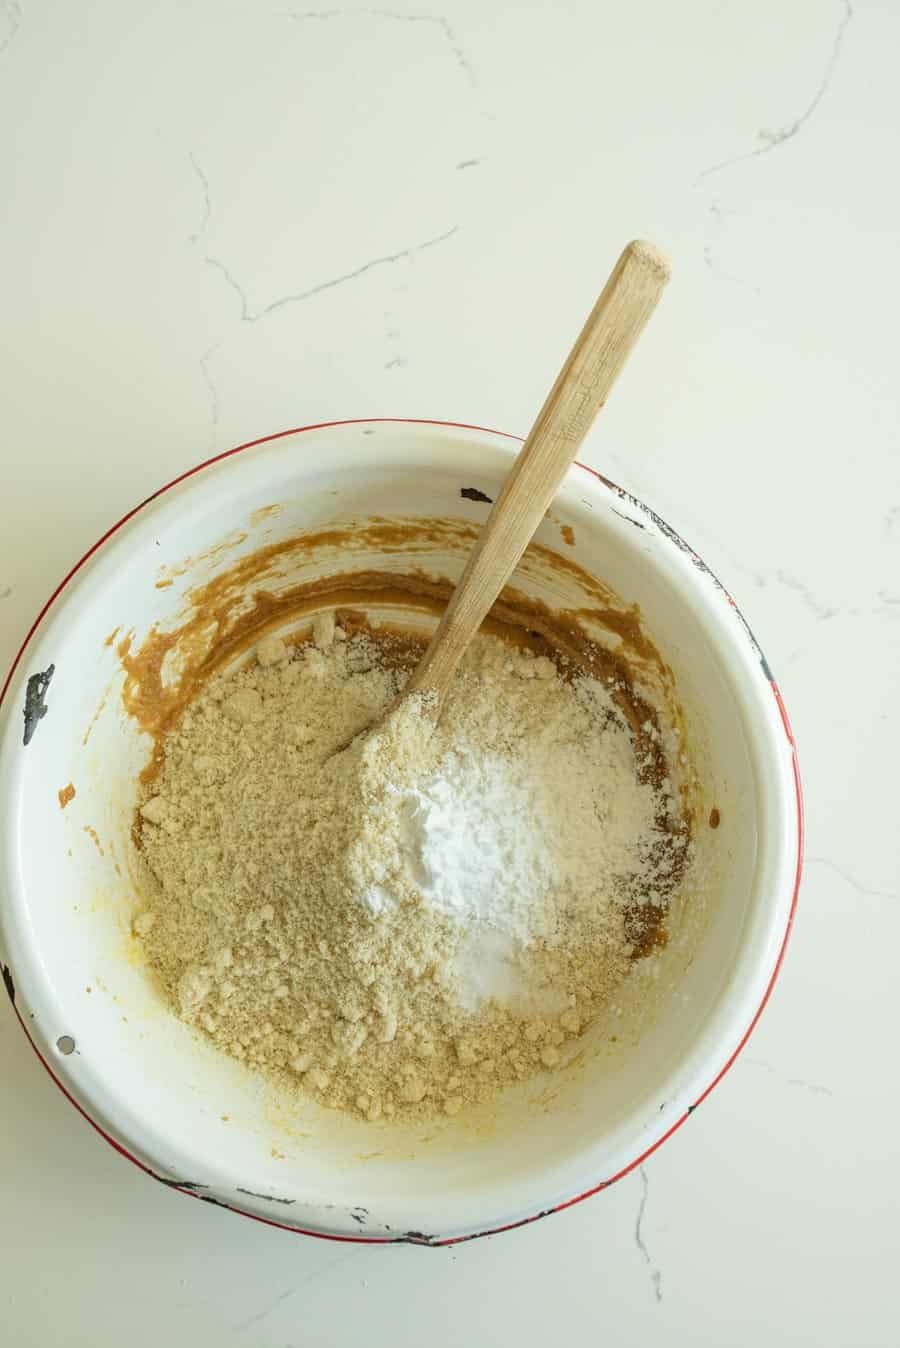 Almond flour and dry ingredients added to the cookie bar dough with a wooden spoon in a white bowl with a red rim. 